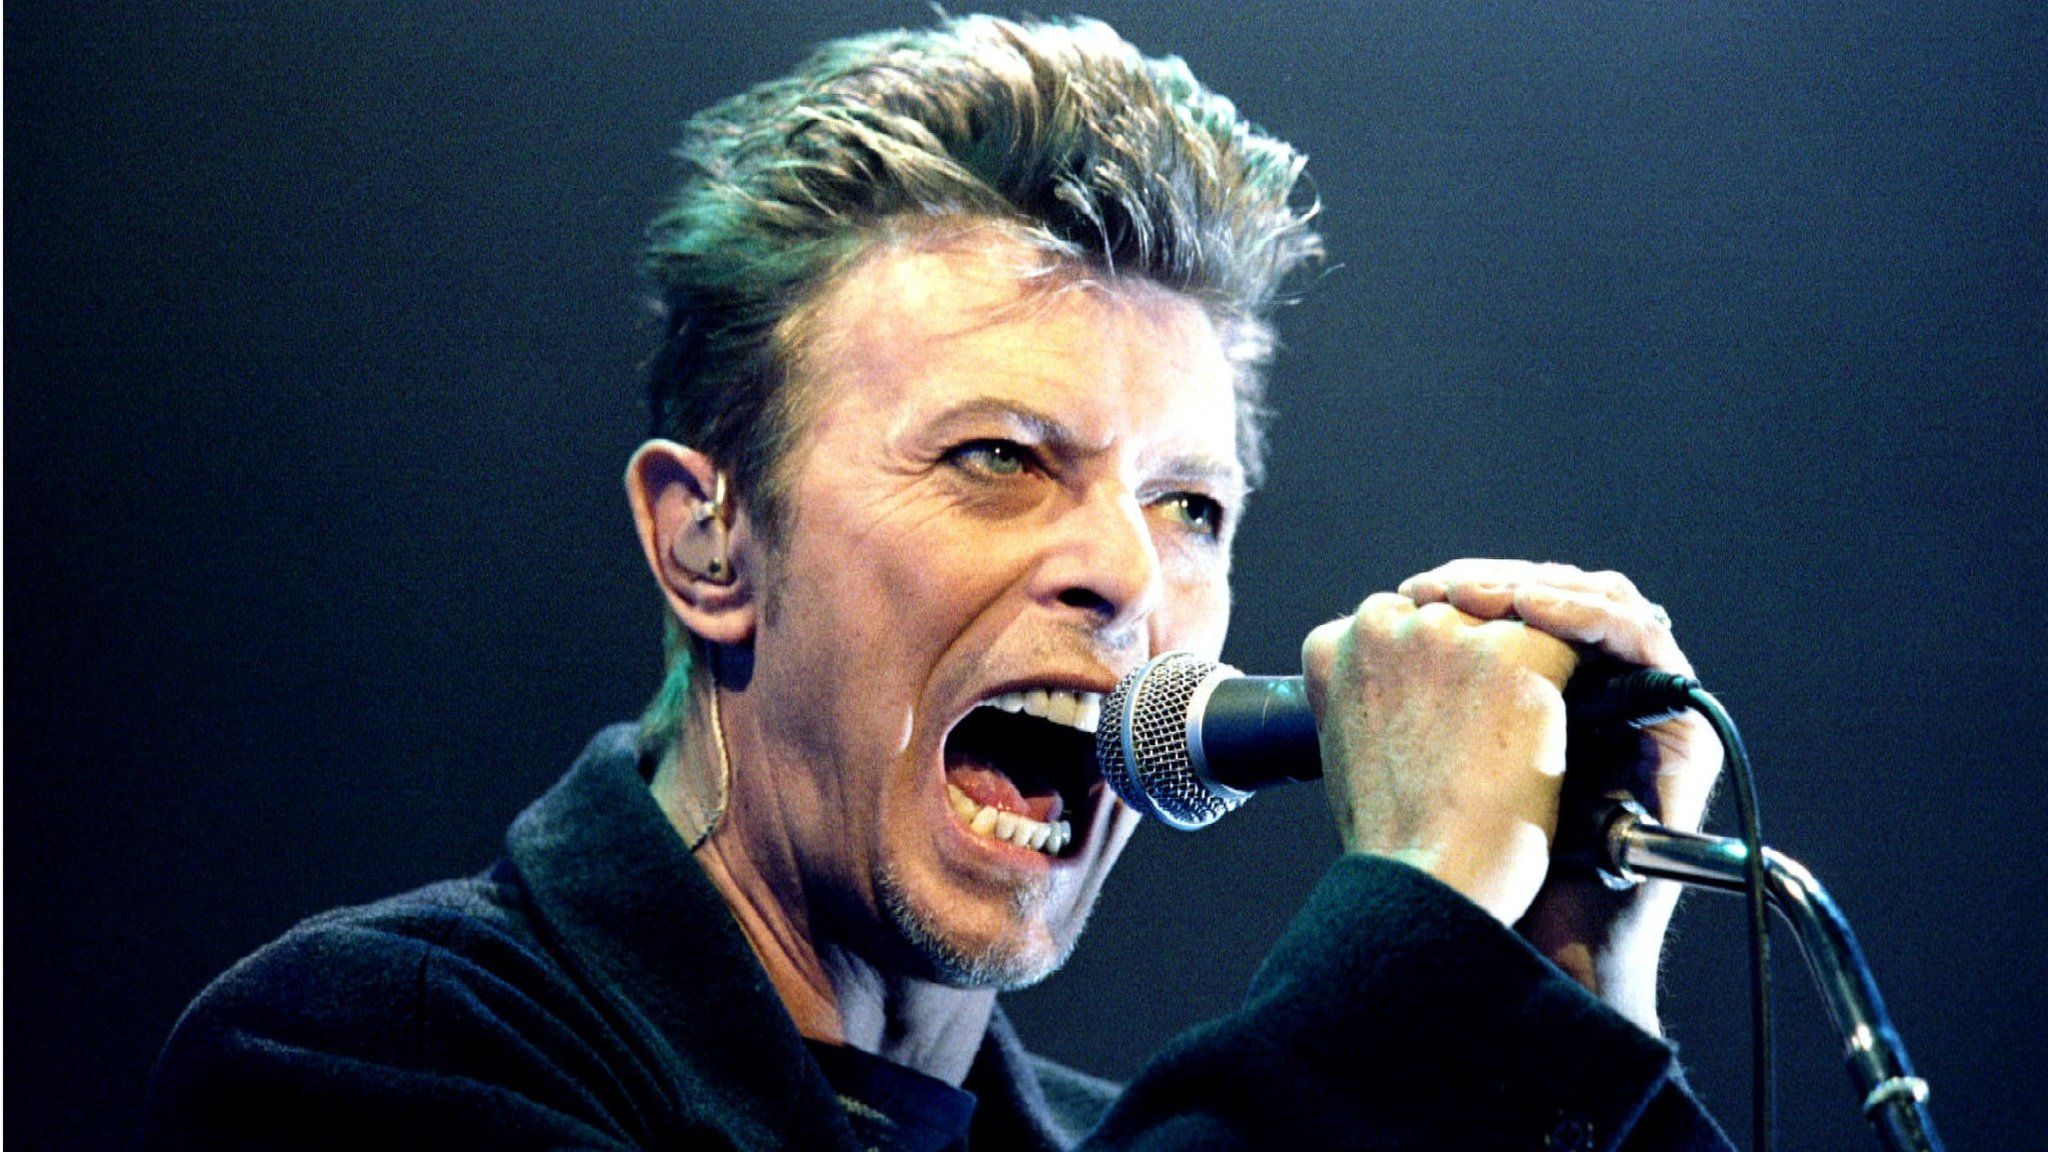 David Bowie performs during a concert in Vienna, Austria in this February 4, 1996 file photo